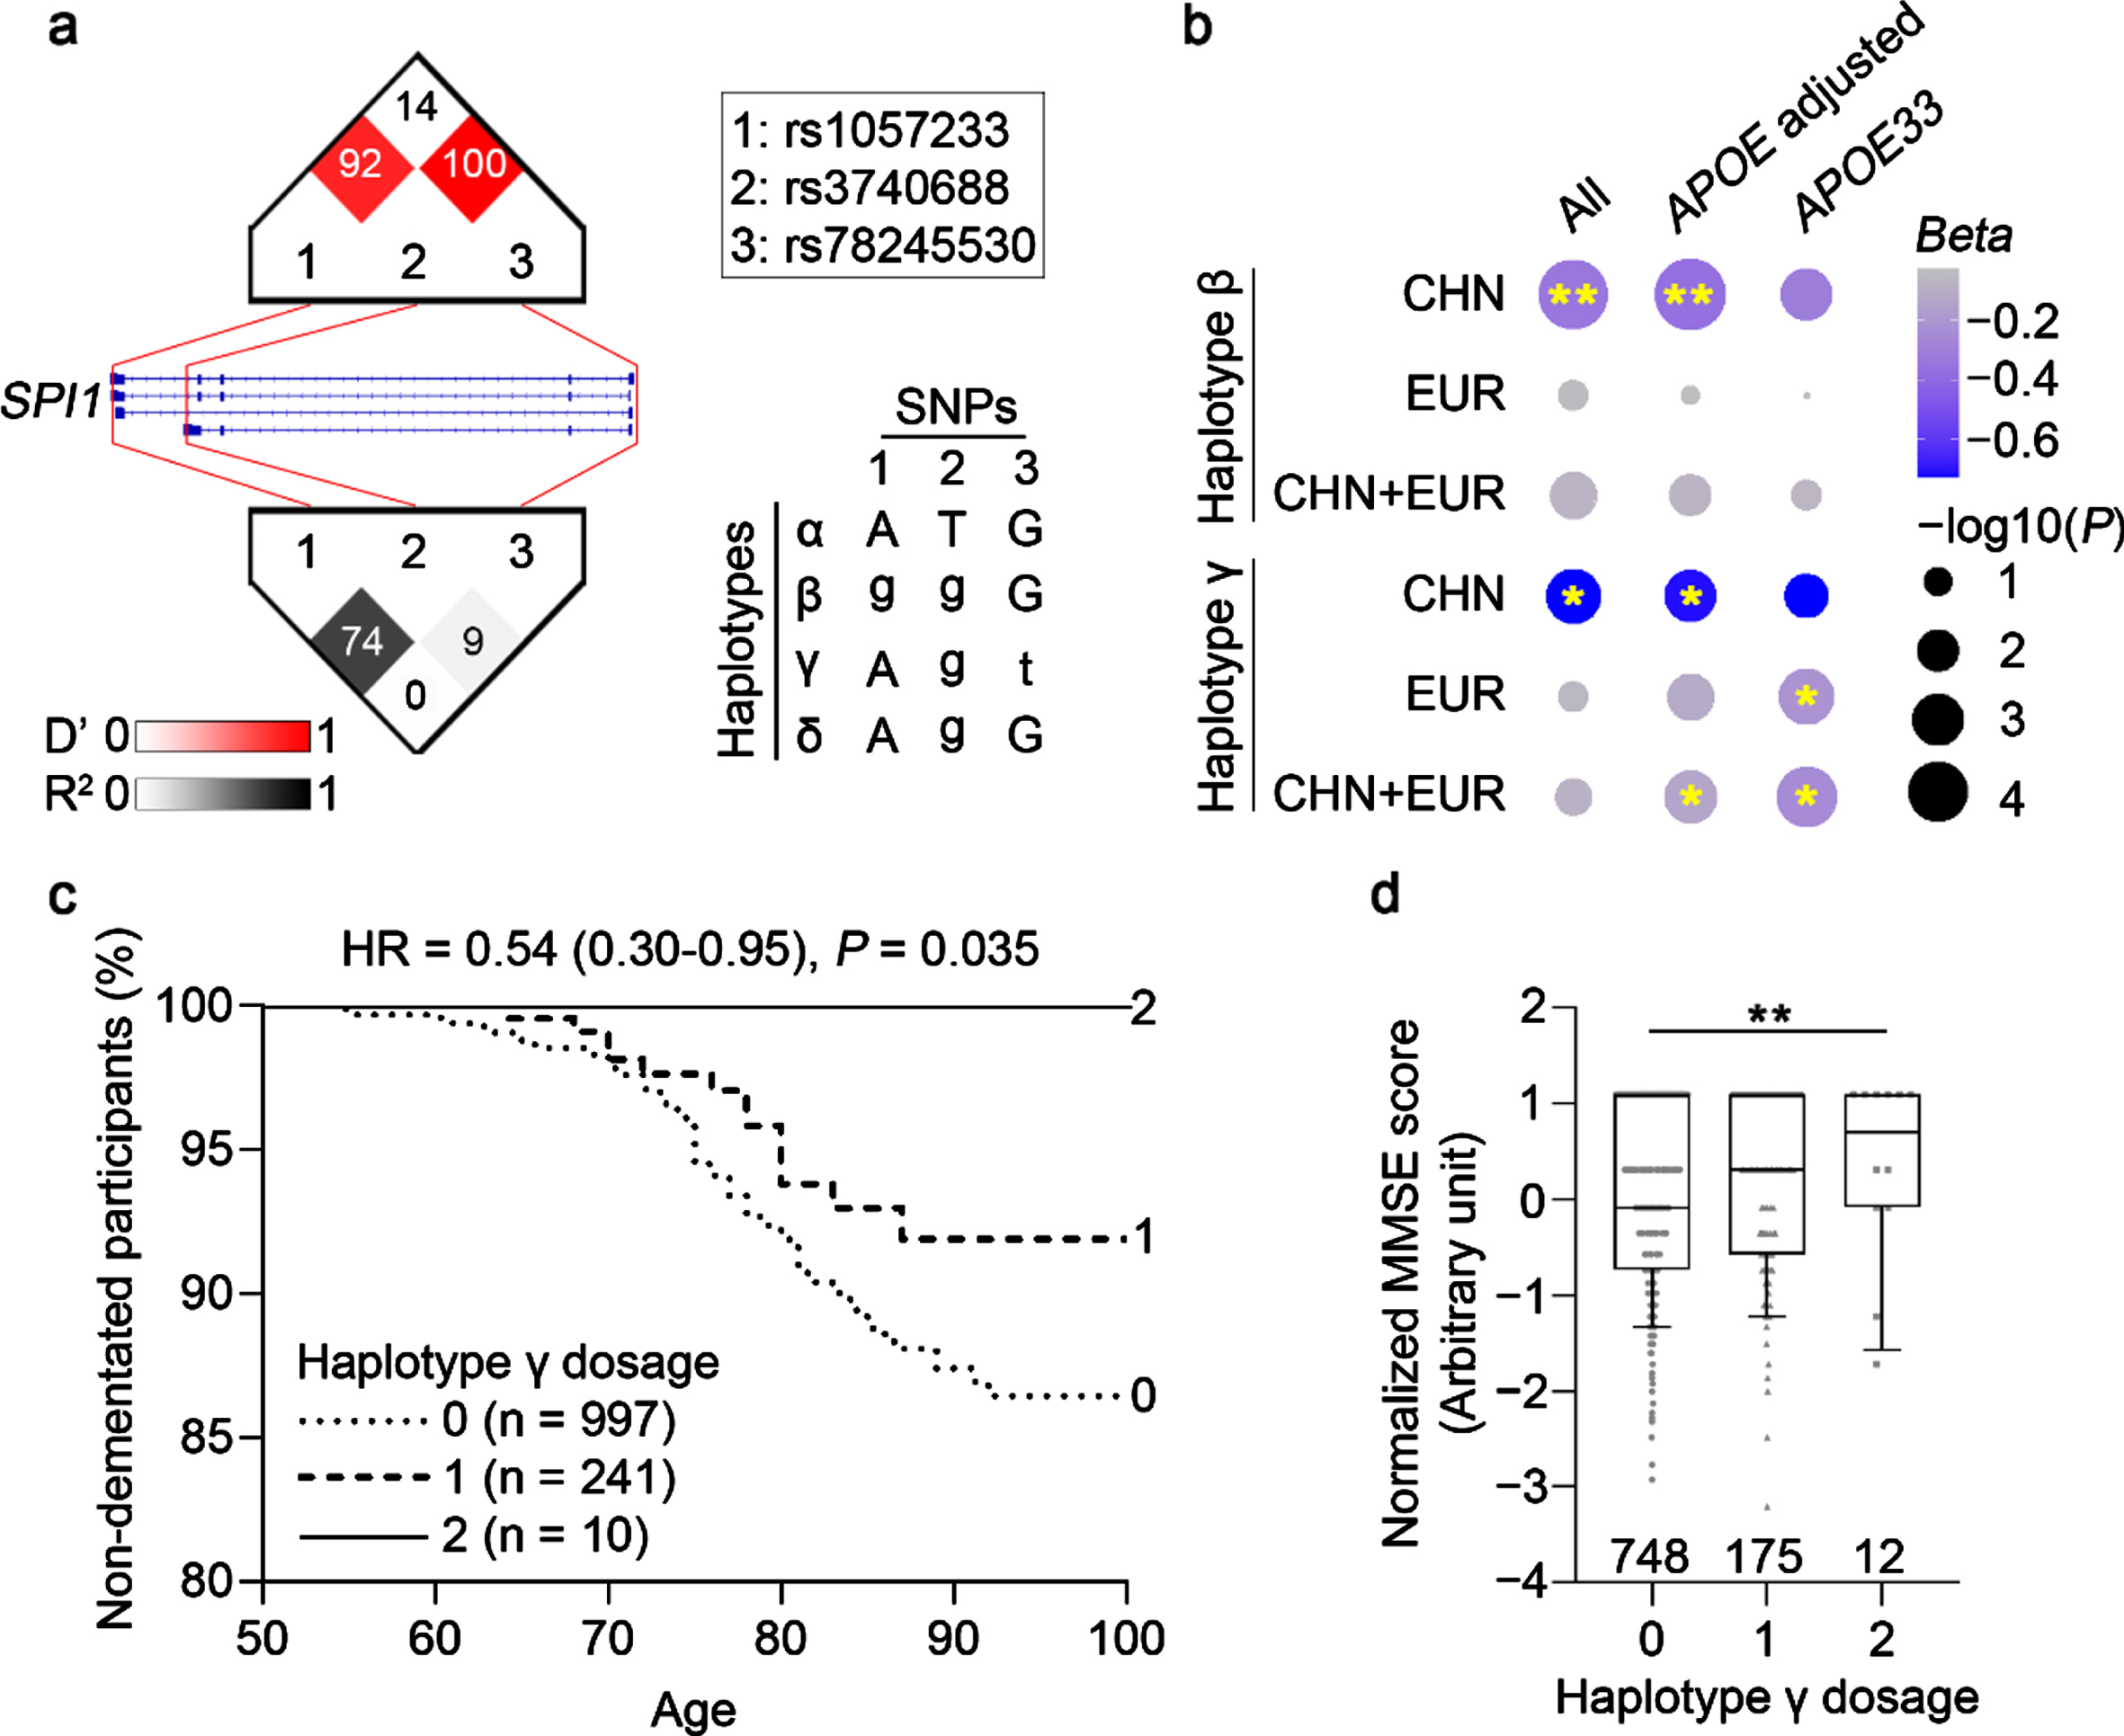 Identification of Alzheimer’s disease-protective SPI1 haplotypes. a) Linkage disequilibrium plot and haplotypes identified in the Hong Kong Chinese Alzheimer’s disease (AD) cohort. Cell color and labeled numbers in the upper and lower panels represent D’ and Pearson’s correlation coefficients (r2) between single-nucleotide polymorphisms (SNPs), respectively. Letters in upper and lower case denote major and minor alleles, respectively. b) AD-protective effects of the identified haplotypes in populations of Chinese and European descent. Dot size and filled color represent – log10(P) and Beta, respectively. **p < 0.01, *p < 0.05. c) Associations between haplotype γ and age of AD onset in APOE33 participants from the Late Onset Alzheimer’s Disease (LOAD) cohort. d) Associations between haplotype γ and Mini–Mental State Examination (MMSE) score in APOE33 participants from the Alzheimer’s Disease Neuroimaging Initiative (ADNI) dataset. **p < 0.01. CHN, Chinese; EUR, European descent; HR, hazard ratio.